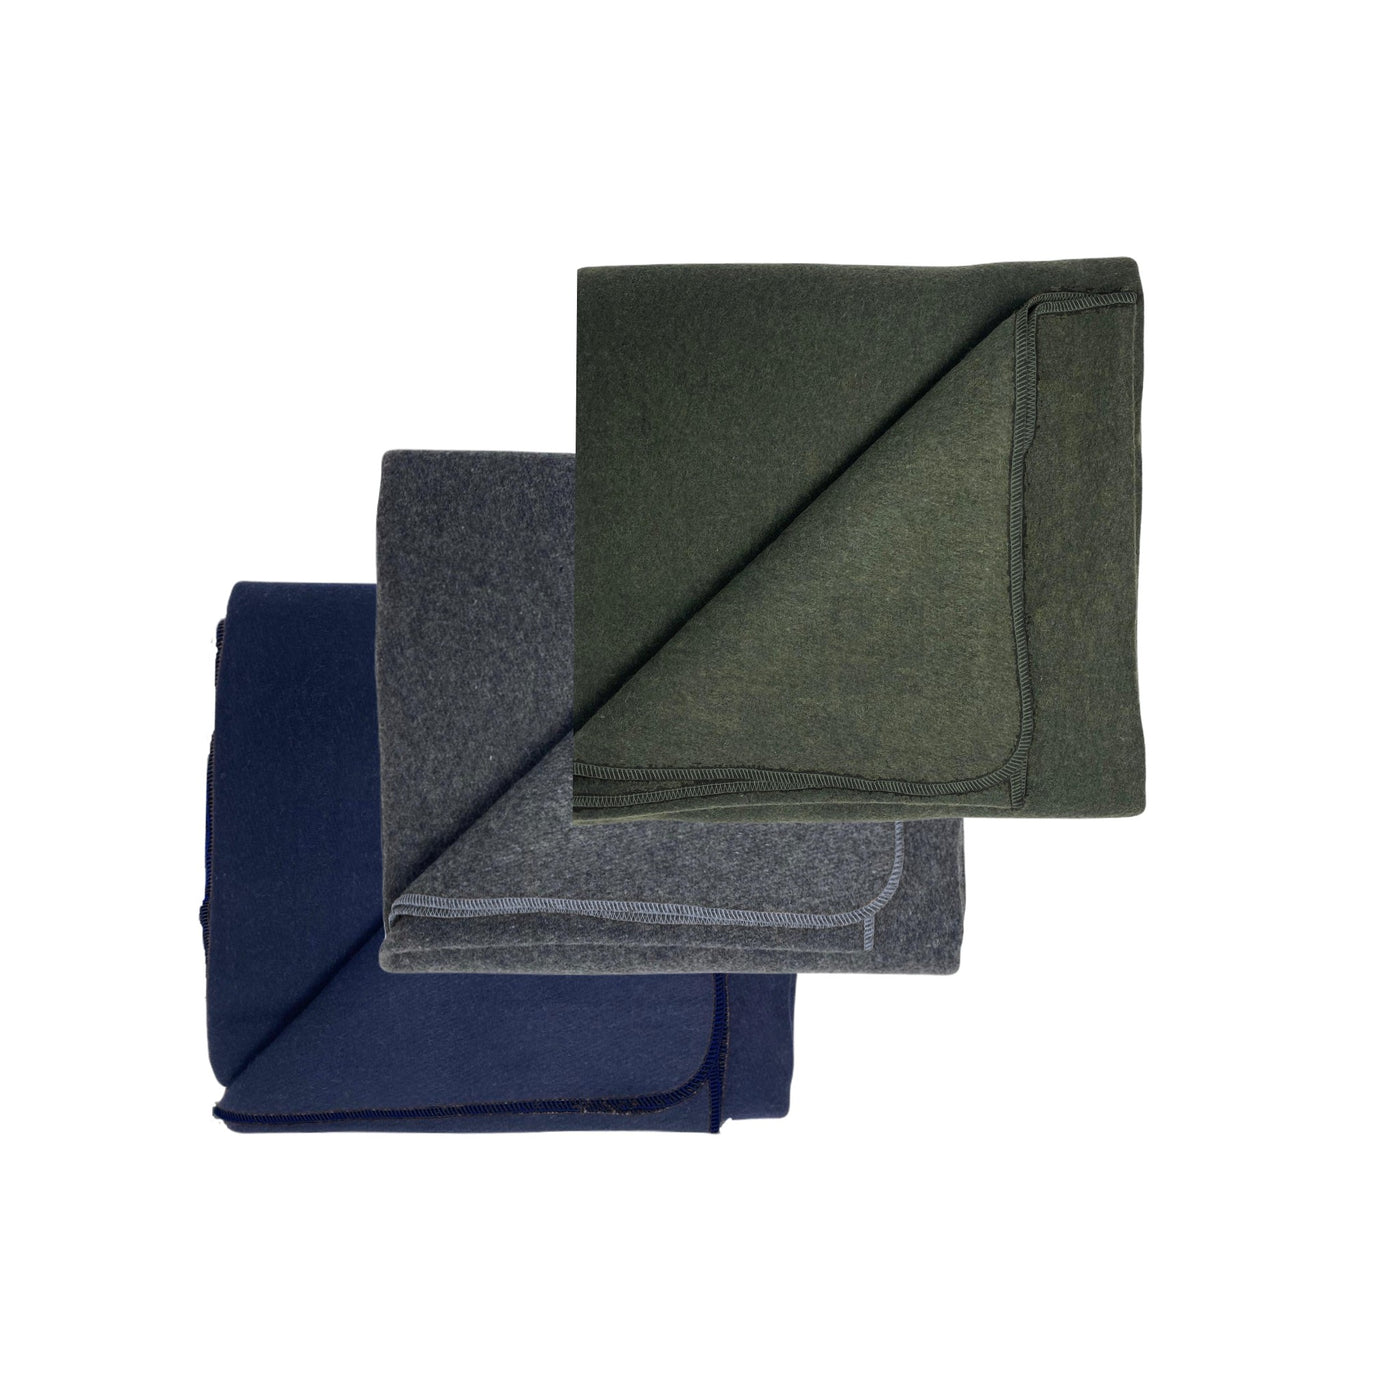 TRIBE ReGen Wool Blankets - Navy, Storm, Olive - Overlaid & folded square with corner turned over | Eco Yoga Store